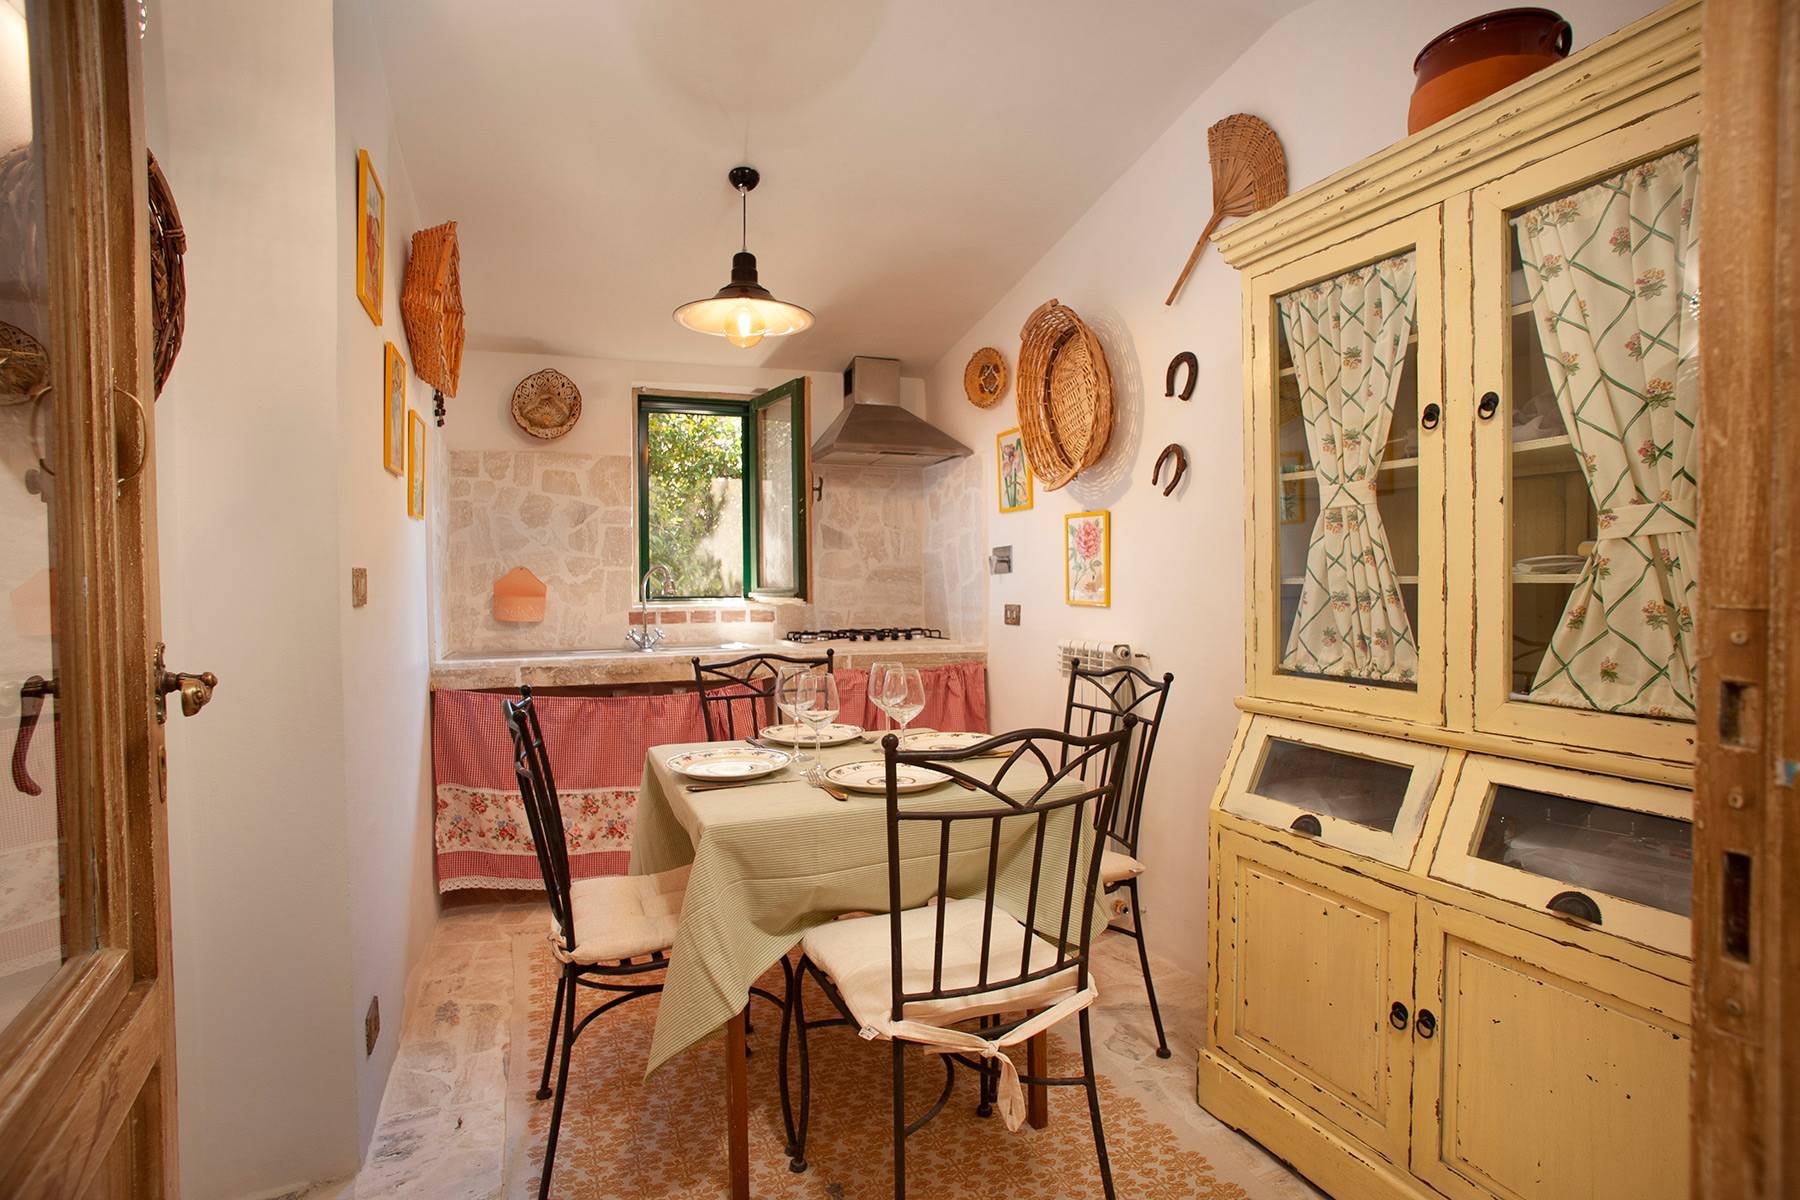 Villa Nayara - Lovely mansion with swimming pool 30 minutes from Rome - 82